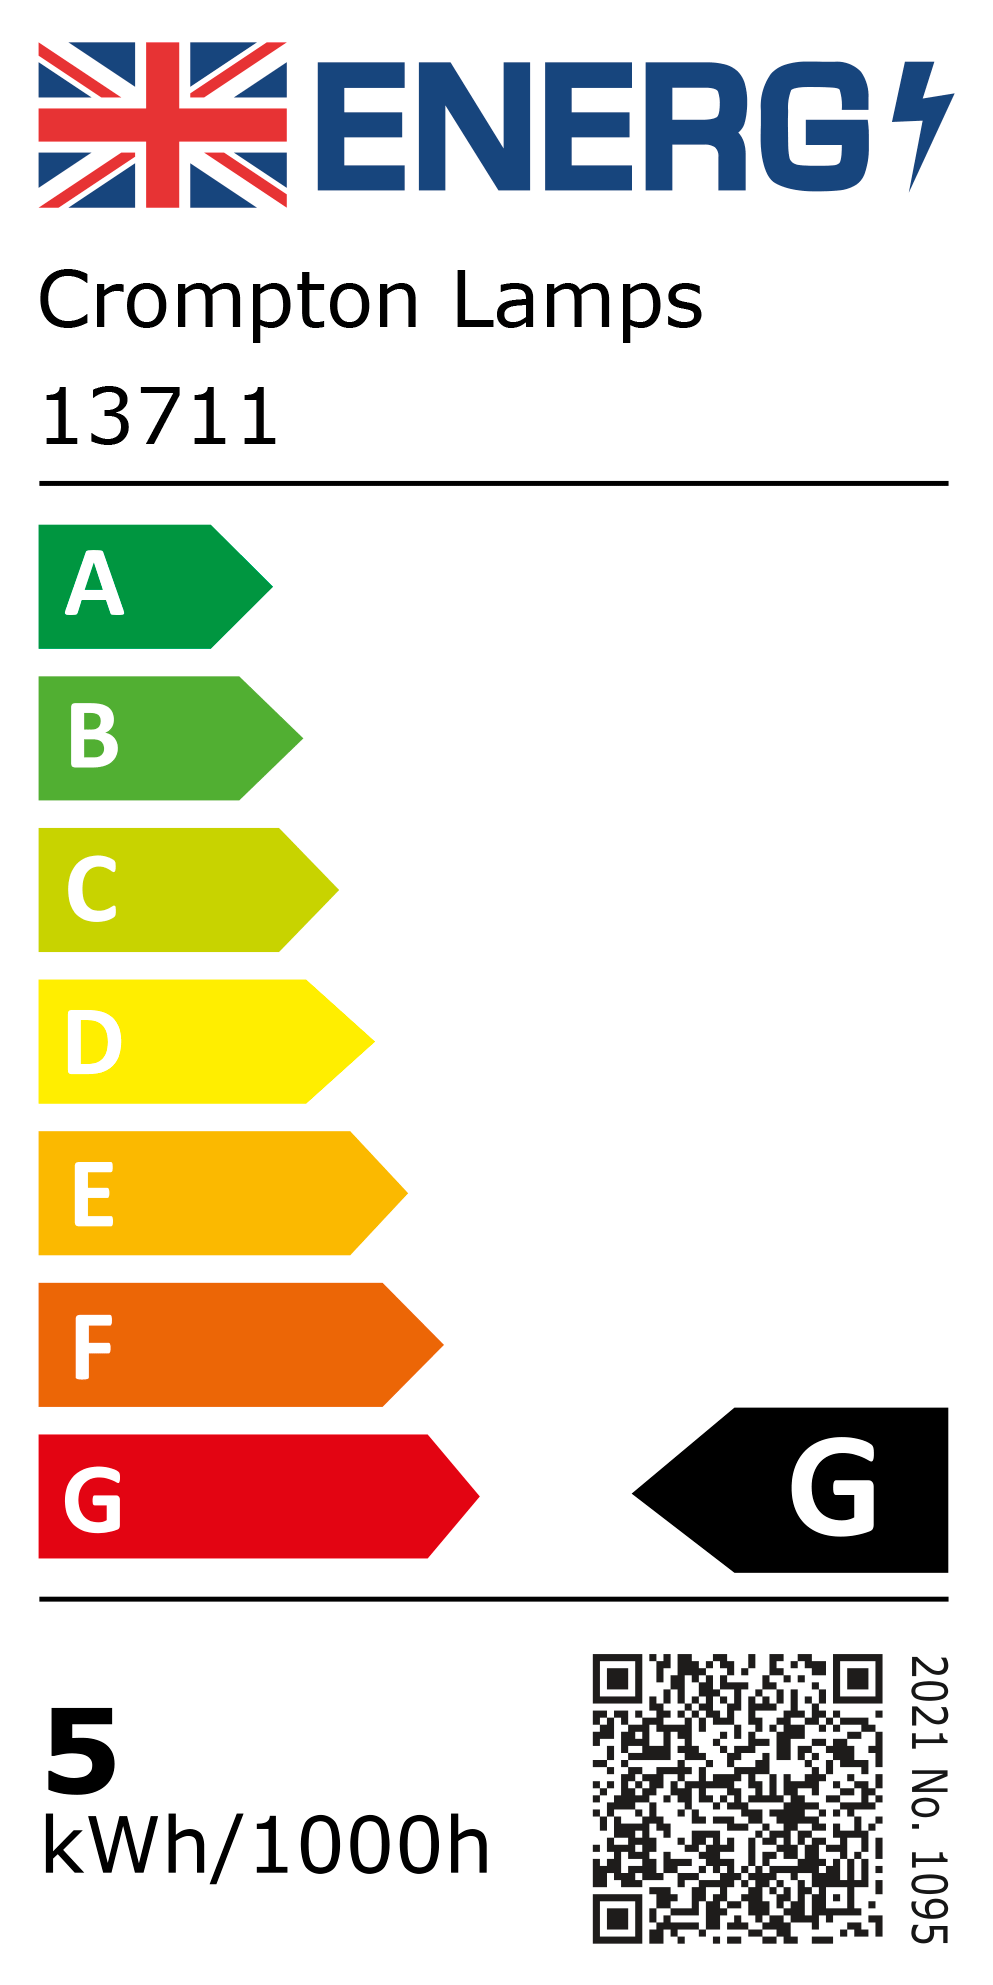 New 2021 Energy Rating Label: Stock Code 13711